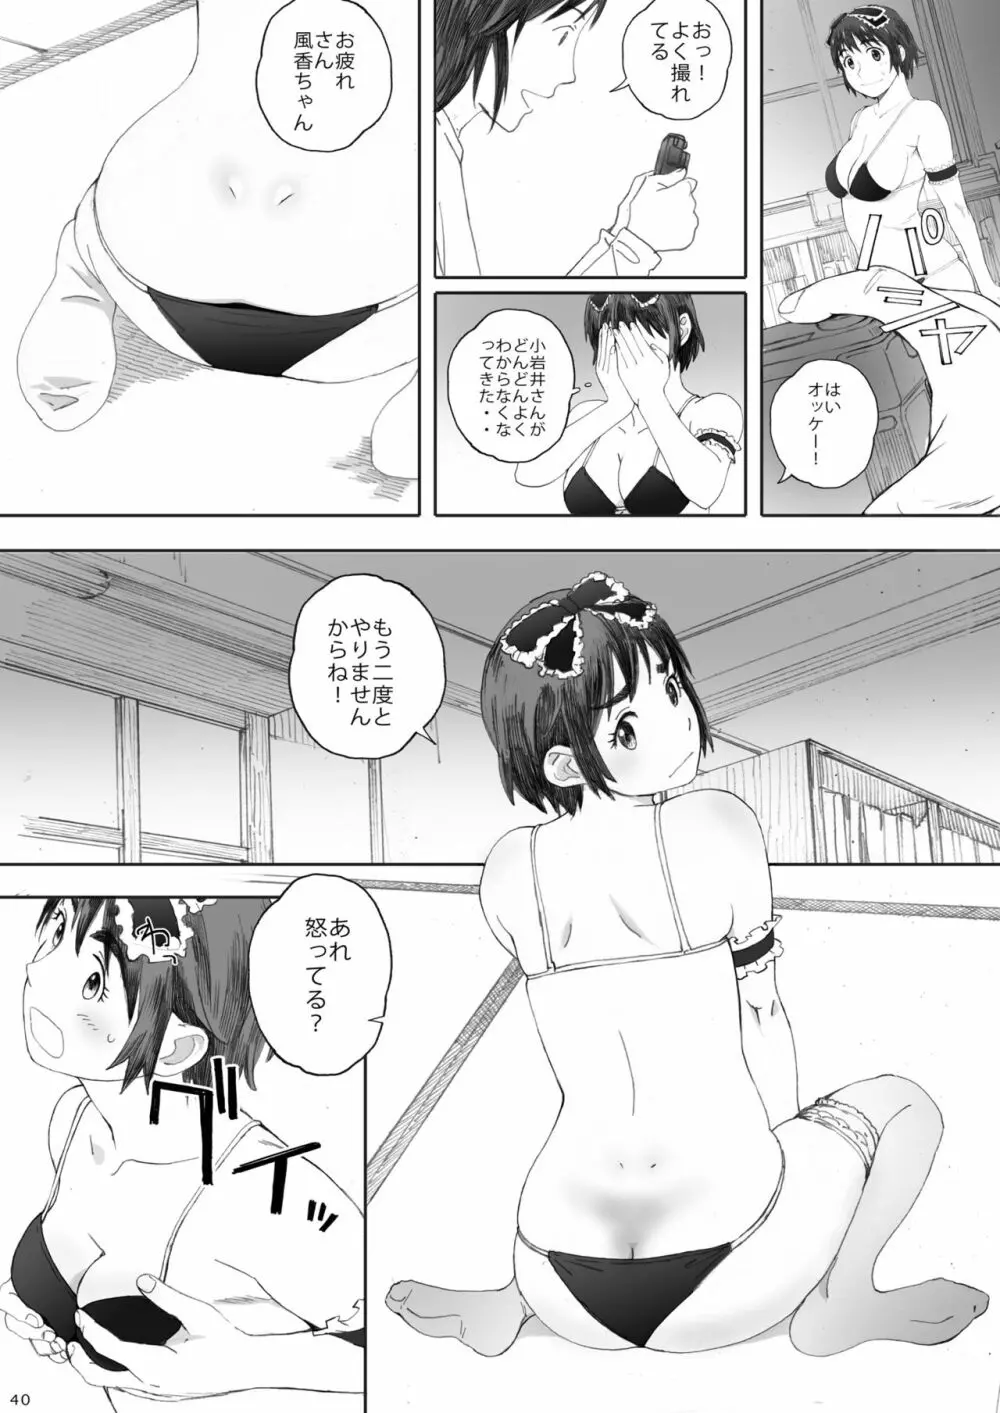 clover 総集編 - page40